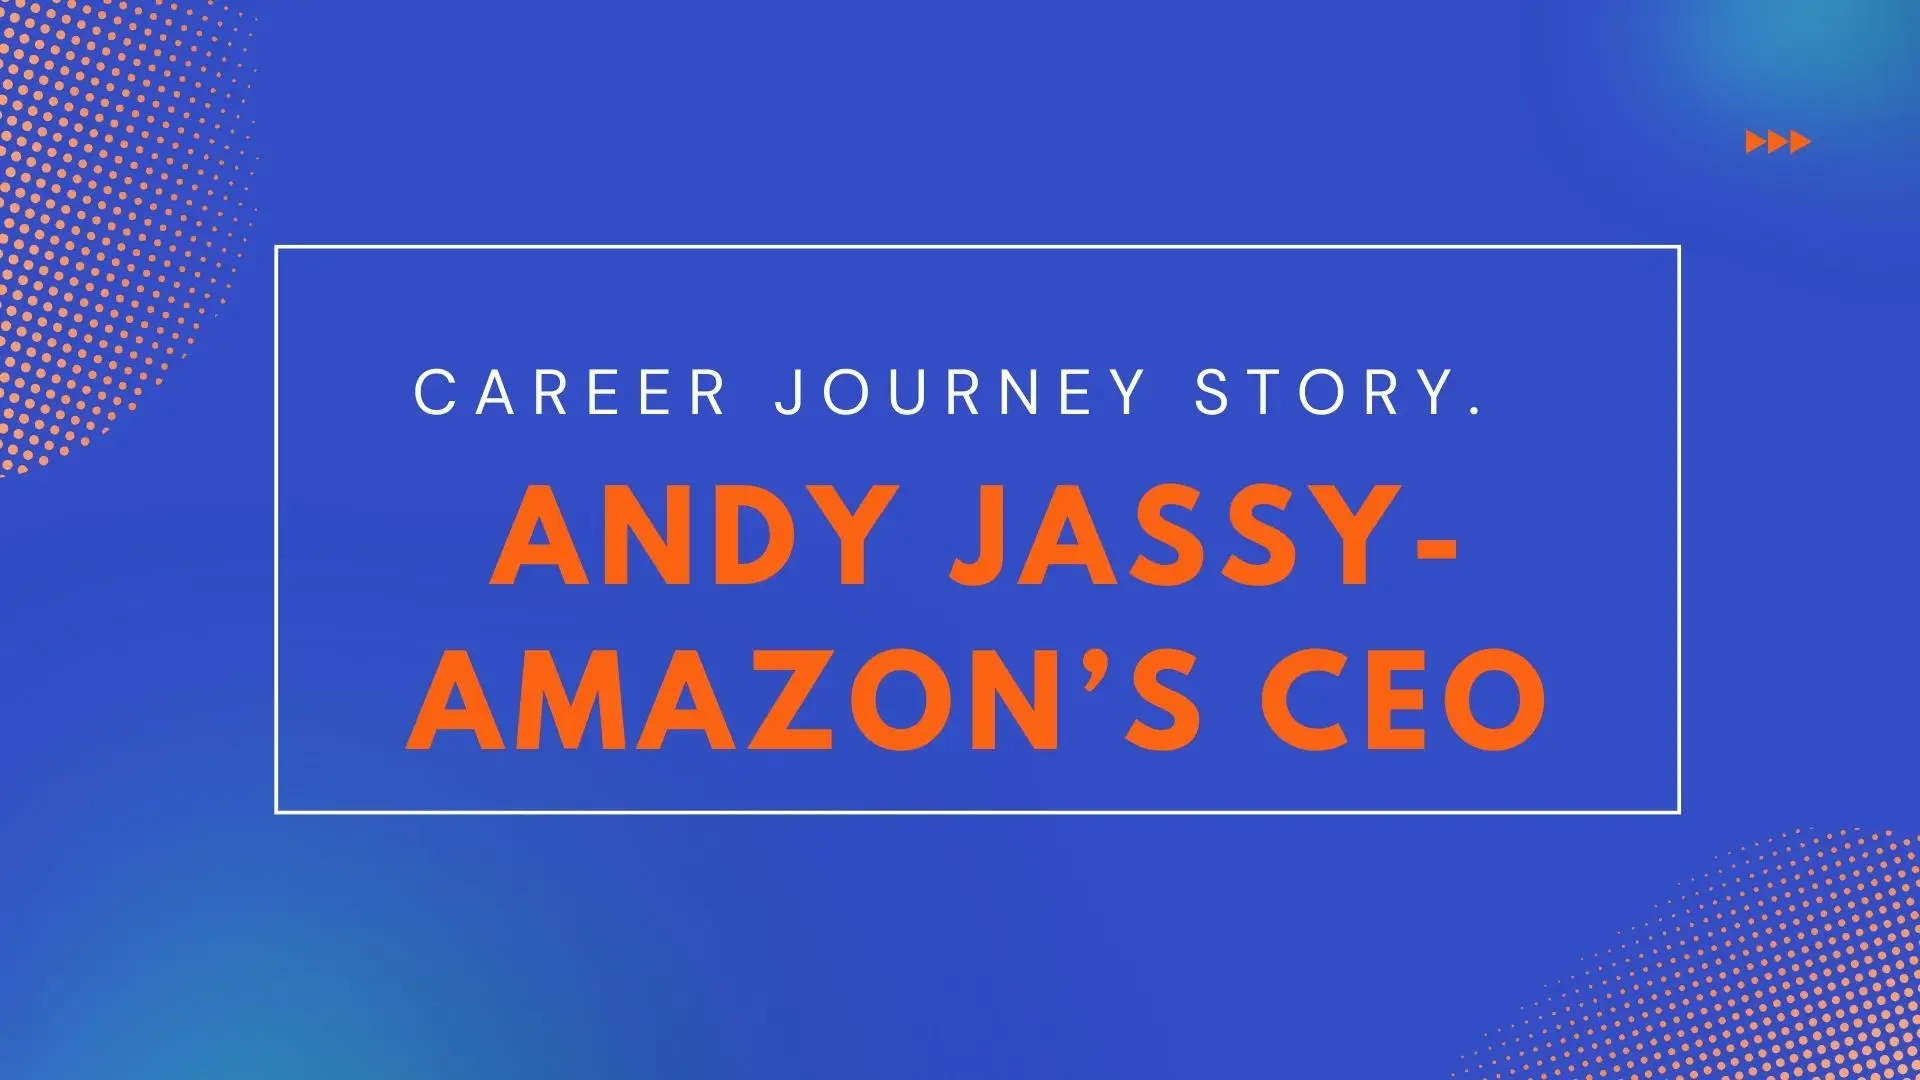 The Career Journey of Andy Jassy-Amazon's CEO